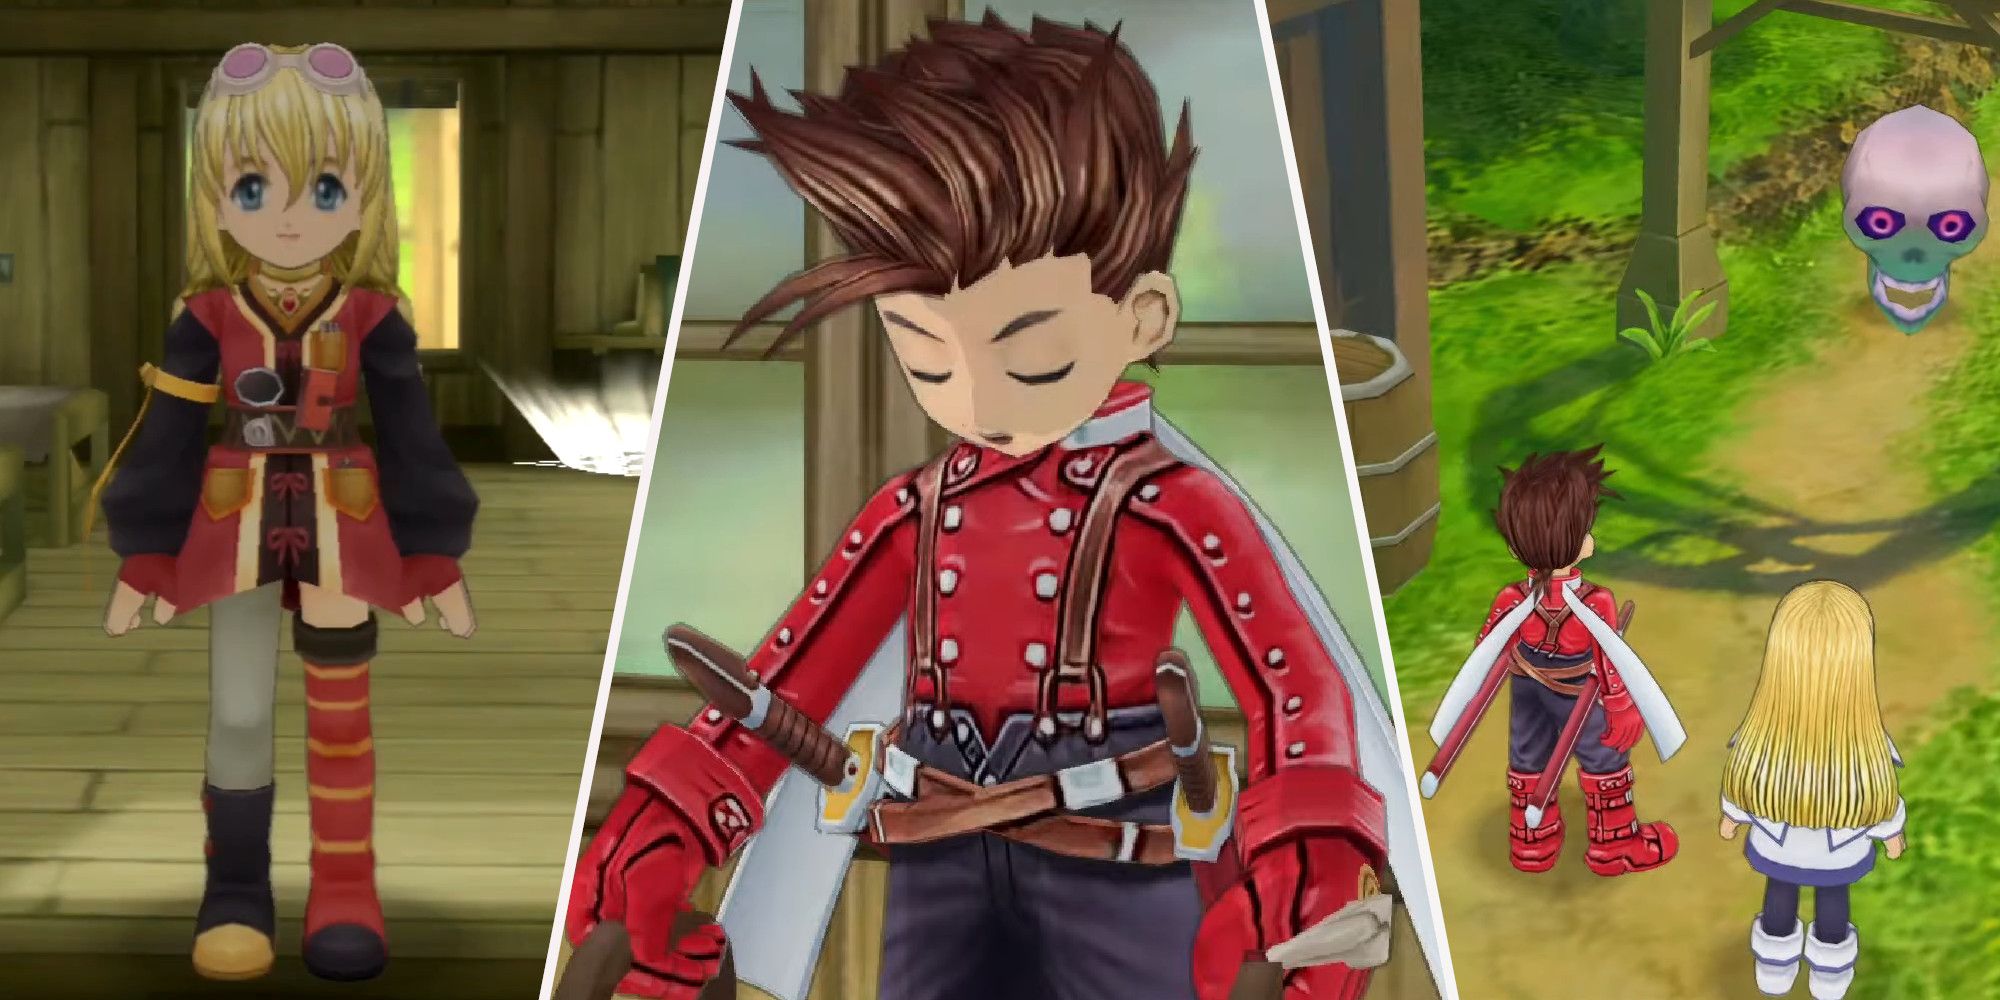 Colette In Genius Researcher Outfit, Lloyd Asleep, and Lloyd and Colette Facing Skull in Tales of Symphonia